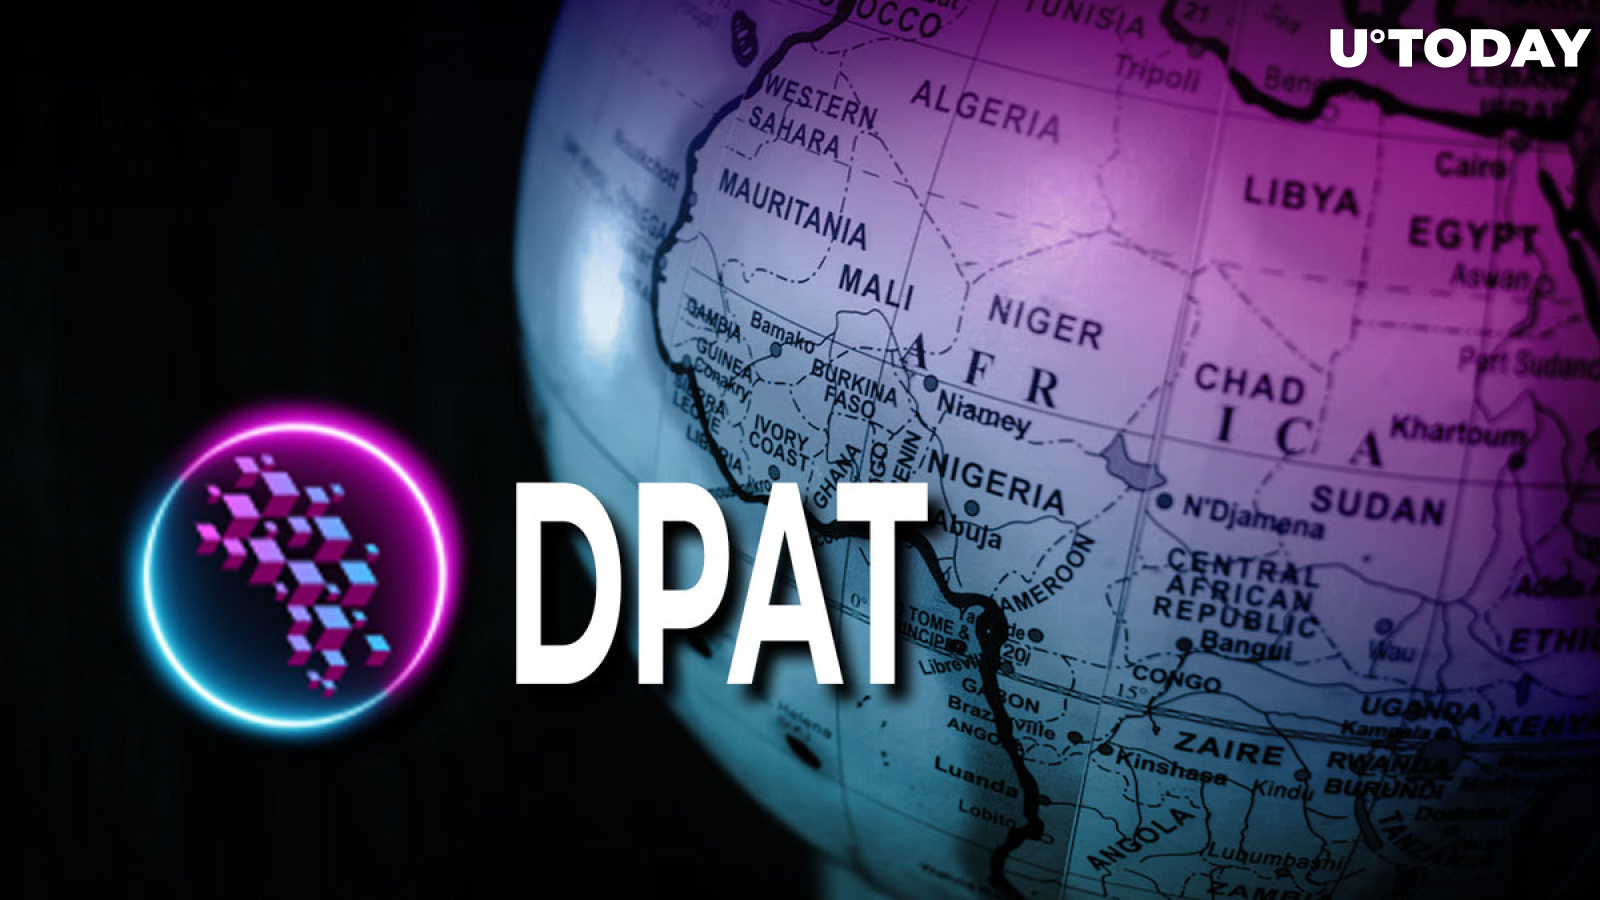 Real Estate DeFi DPA Token (DPAT) Opens African Land and Property Markets to Retail Capital